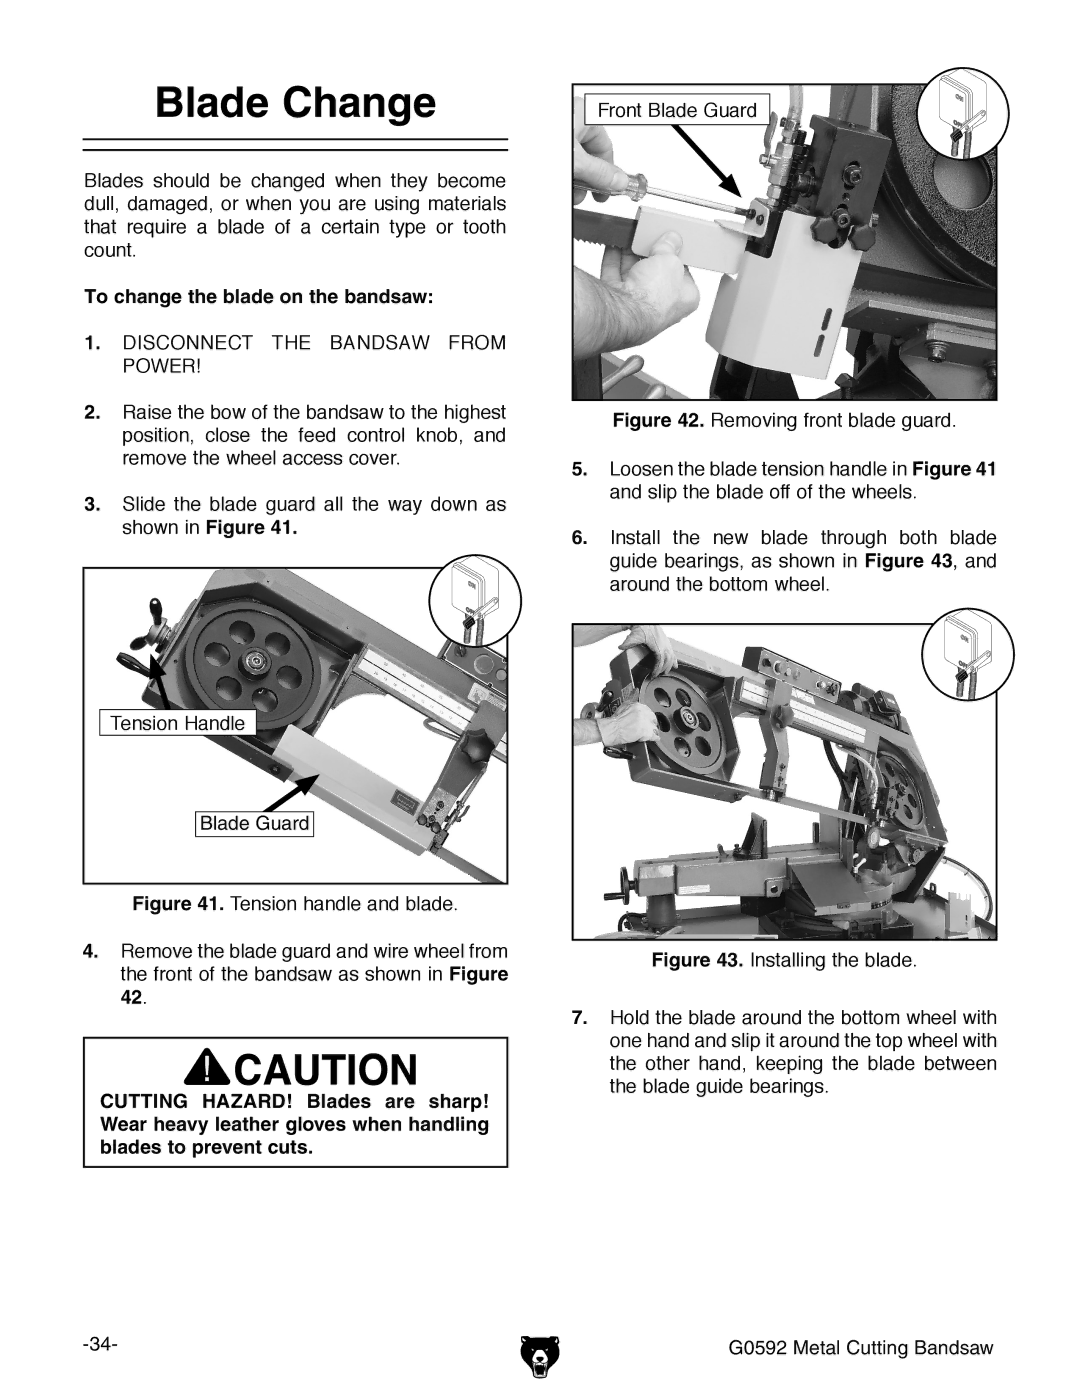 Grizzly G0592 owner manual Blade Change, To change the blade on the bandsaw 